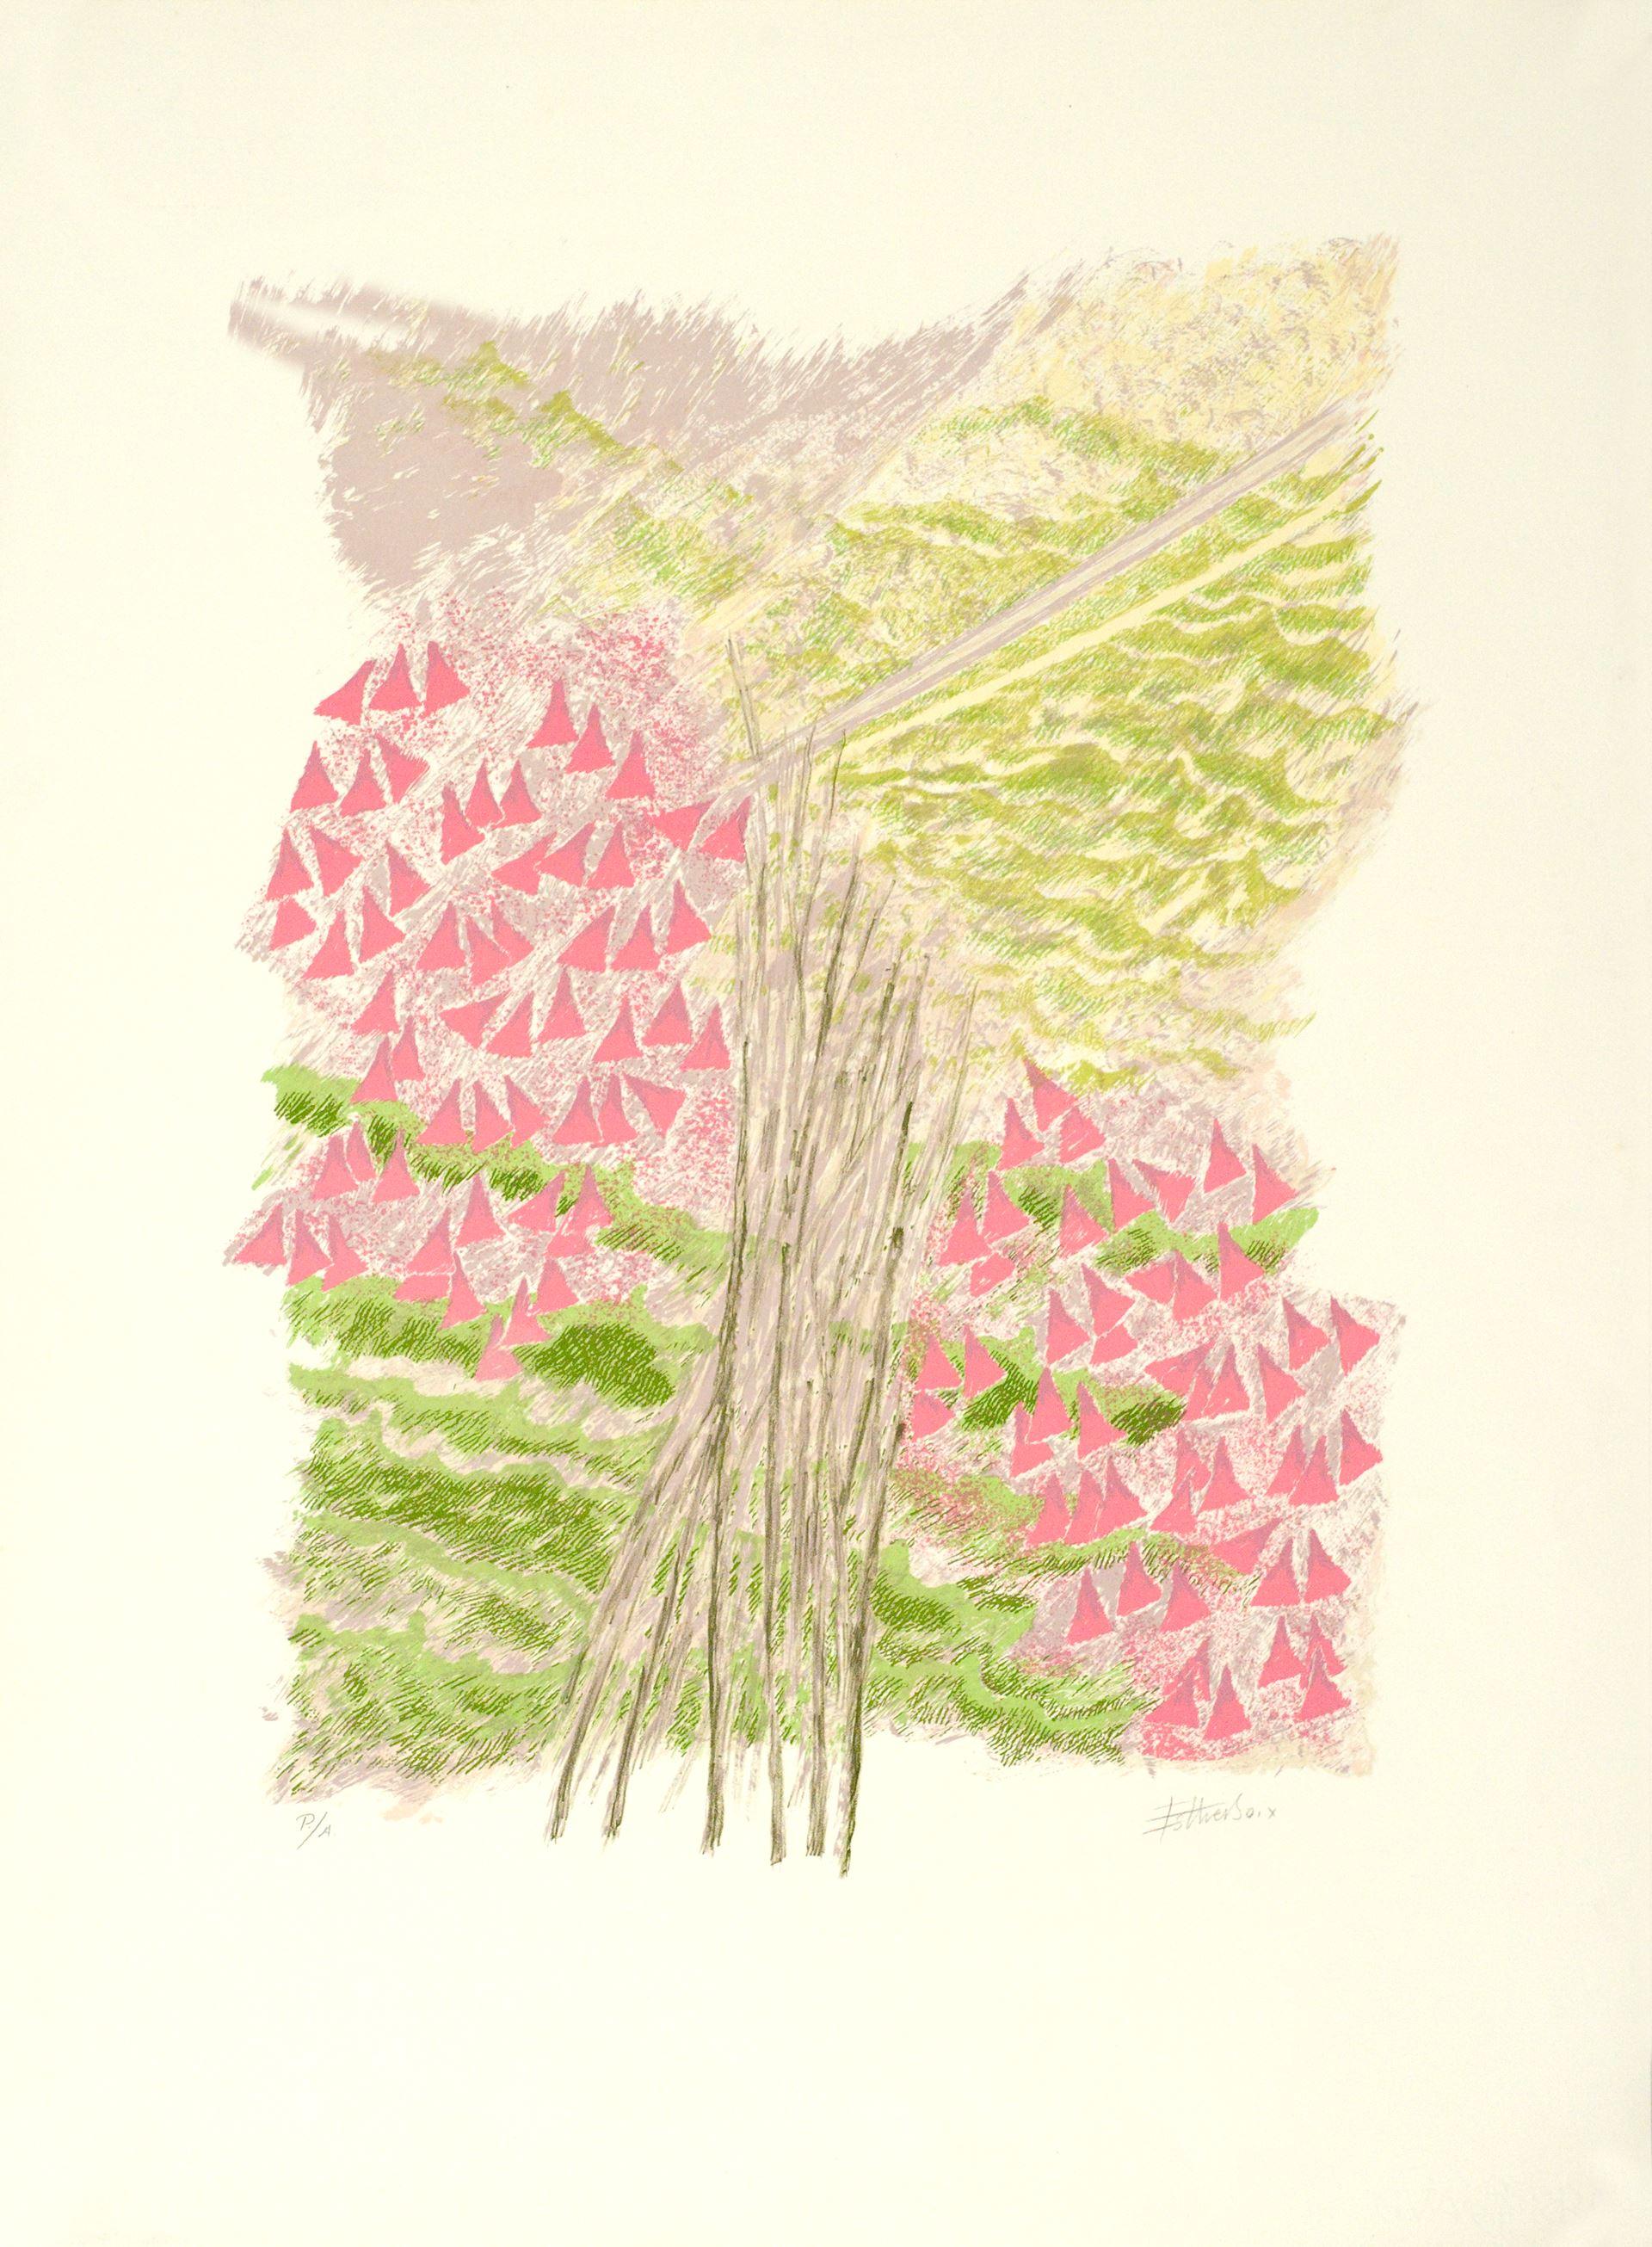 Esther Boix (Spain, 1927-2014)
'La fucsia', ca. 2000
lithograph on paper
30 x 22.1 in. (76 x 56 cm.)
Edition of 99
Series number: P/A (Artist Proof)
Unframed
ID: BOI1340-001-000
Hand-signed by author

Esther Boix was a Catalan painter and teacher